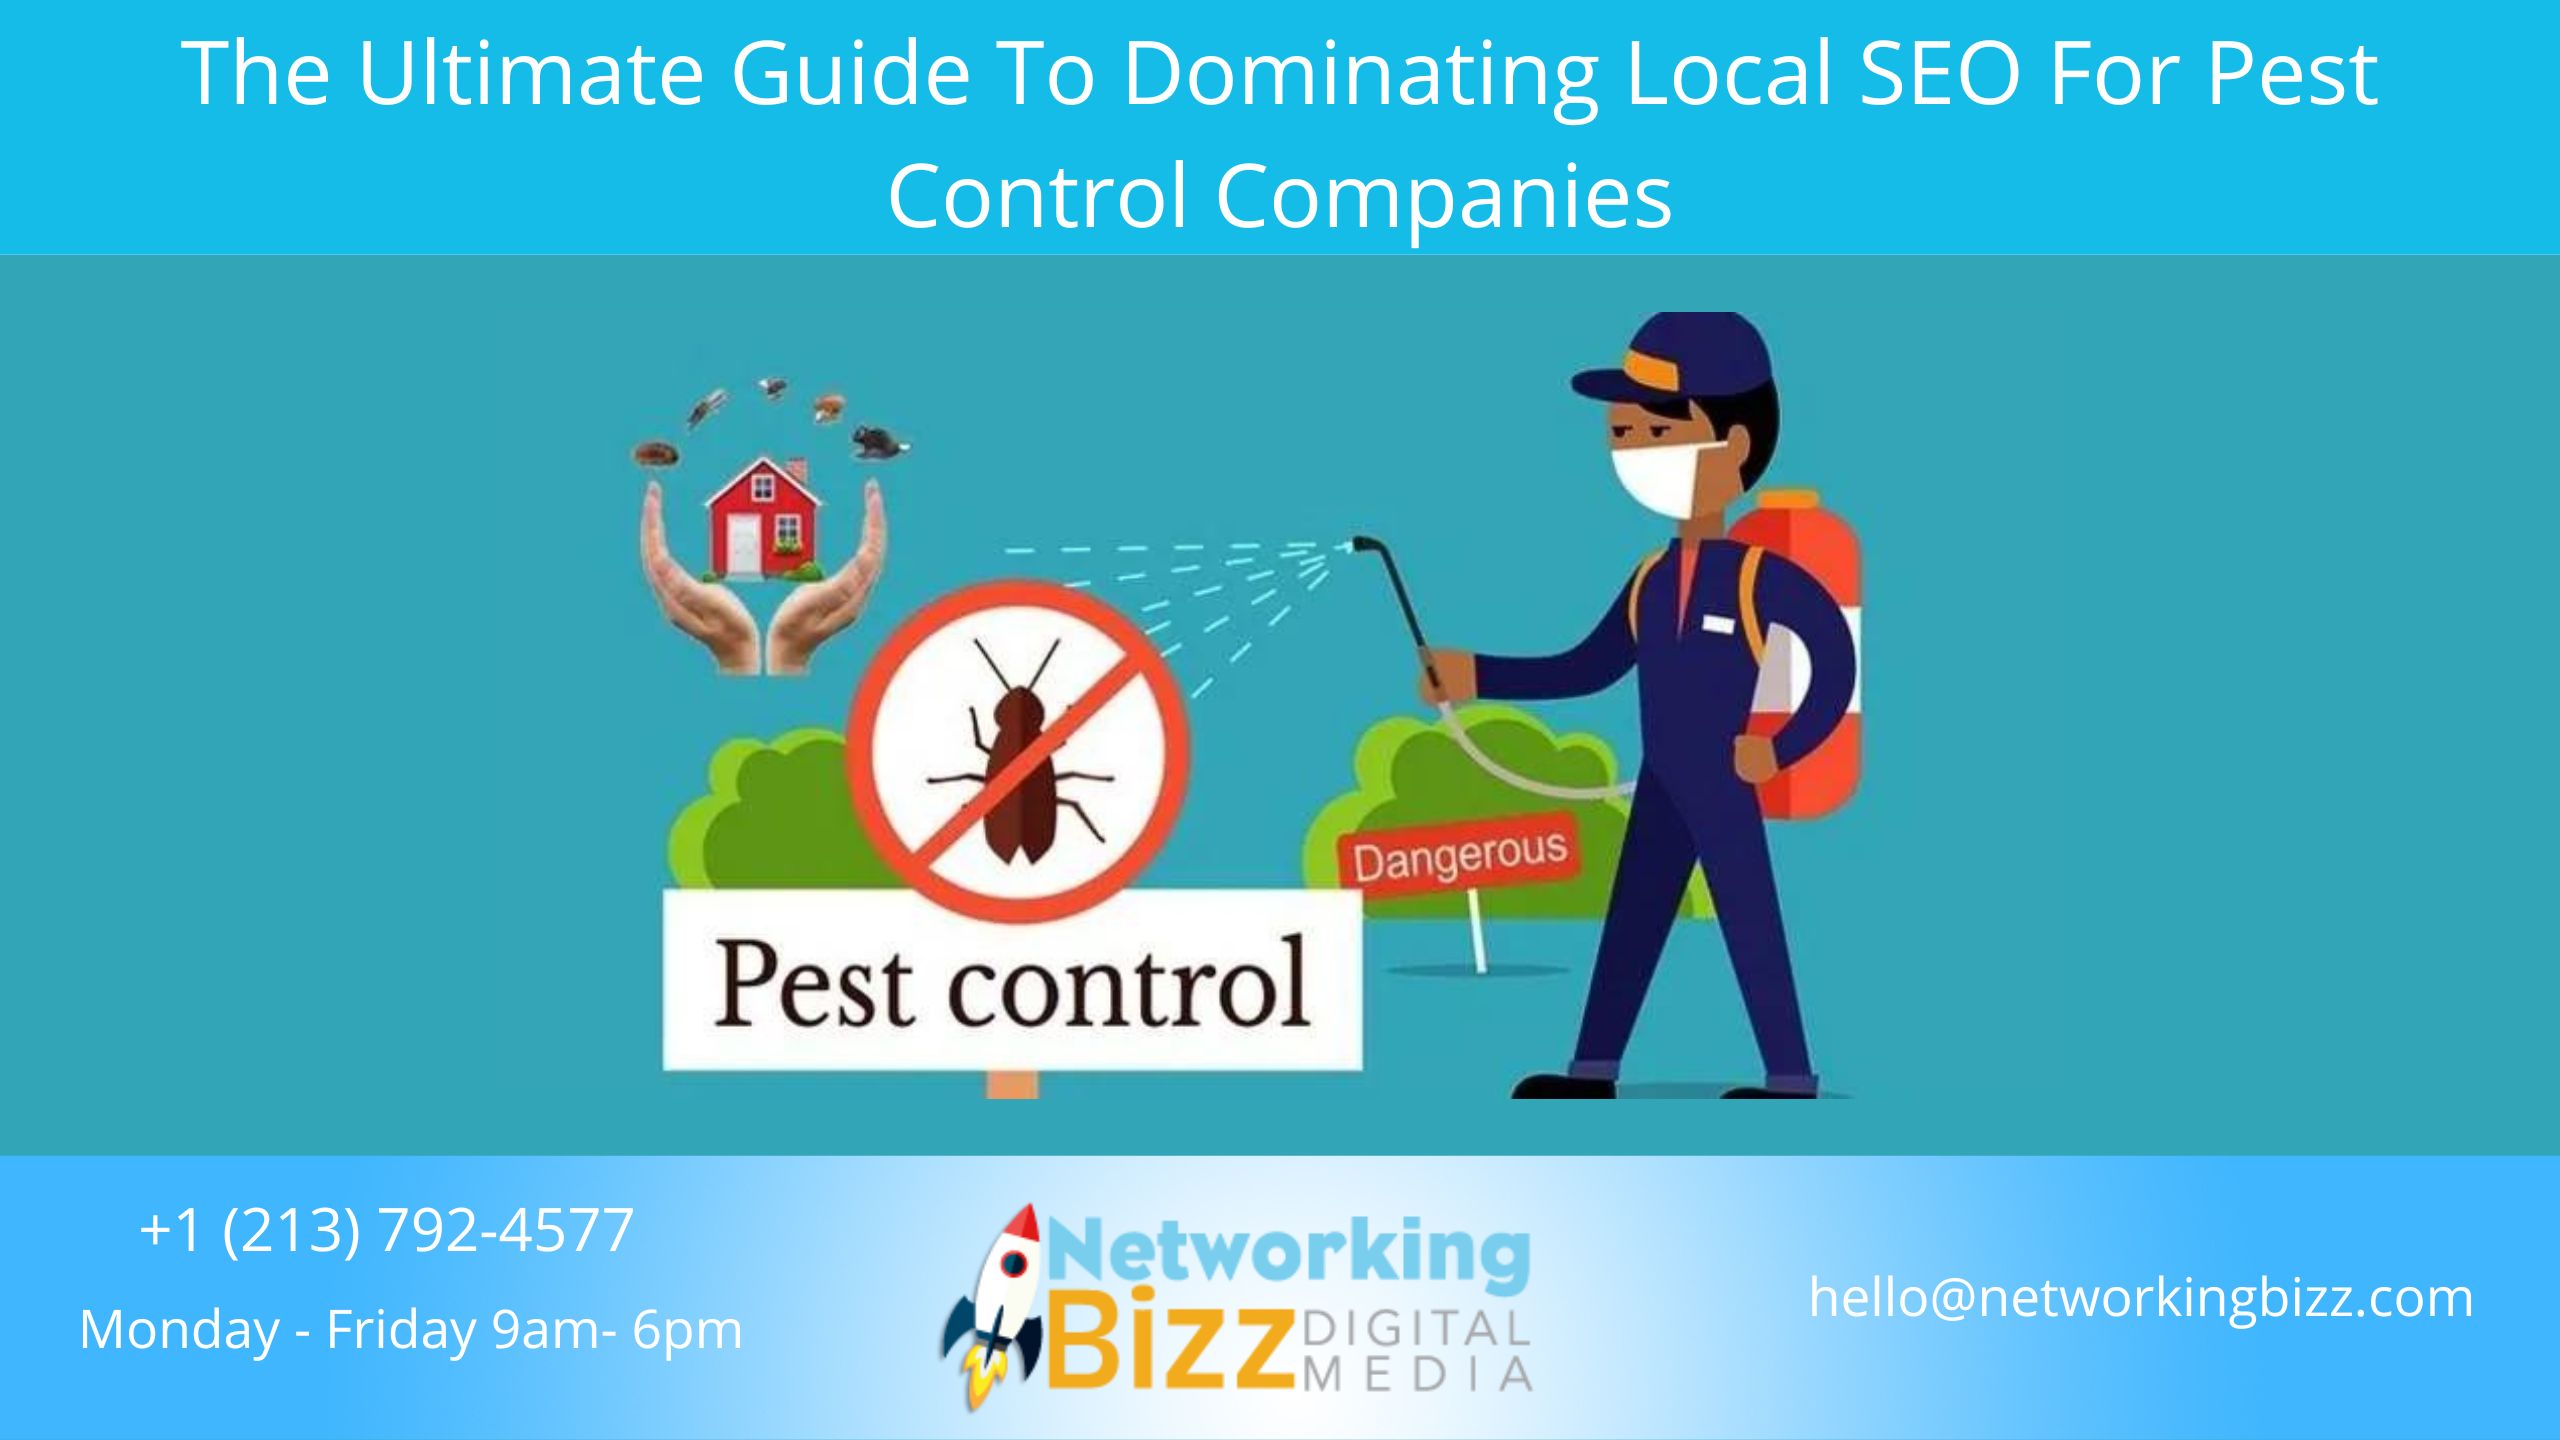 The Ultimate Guide To Dominating Local SEO For Pest Control Companies